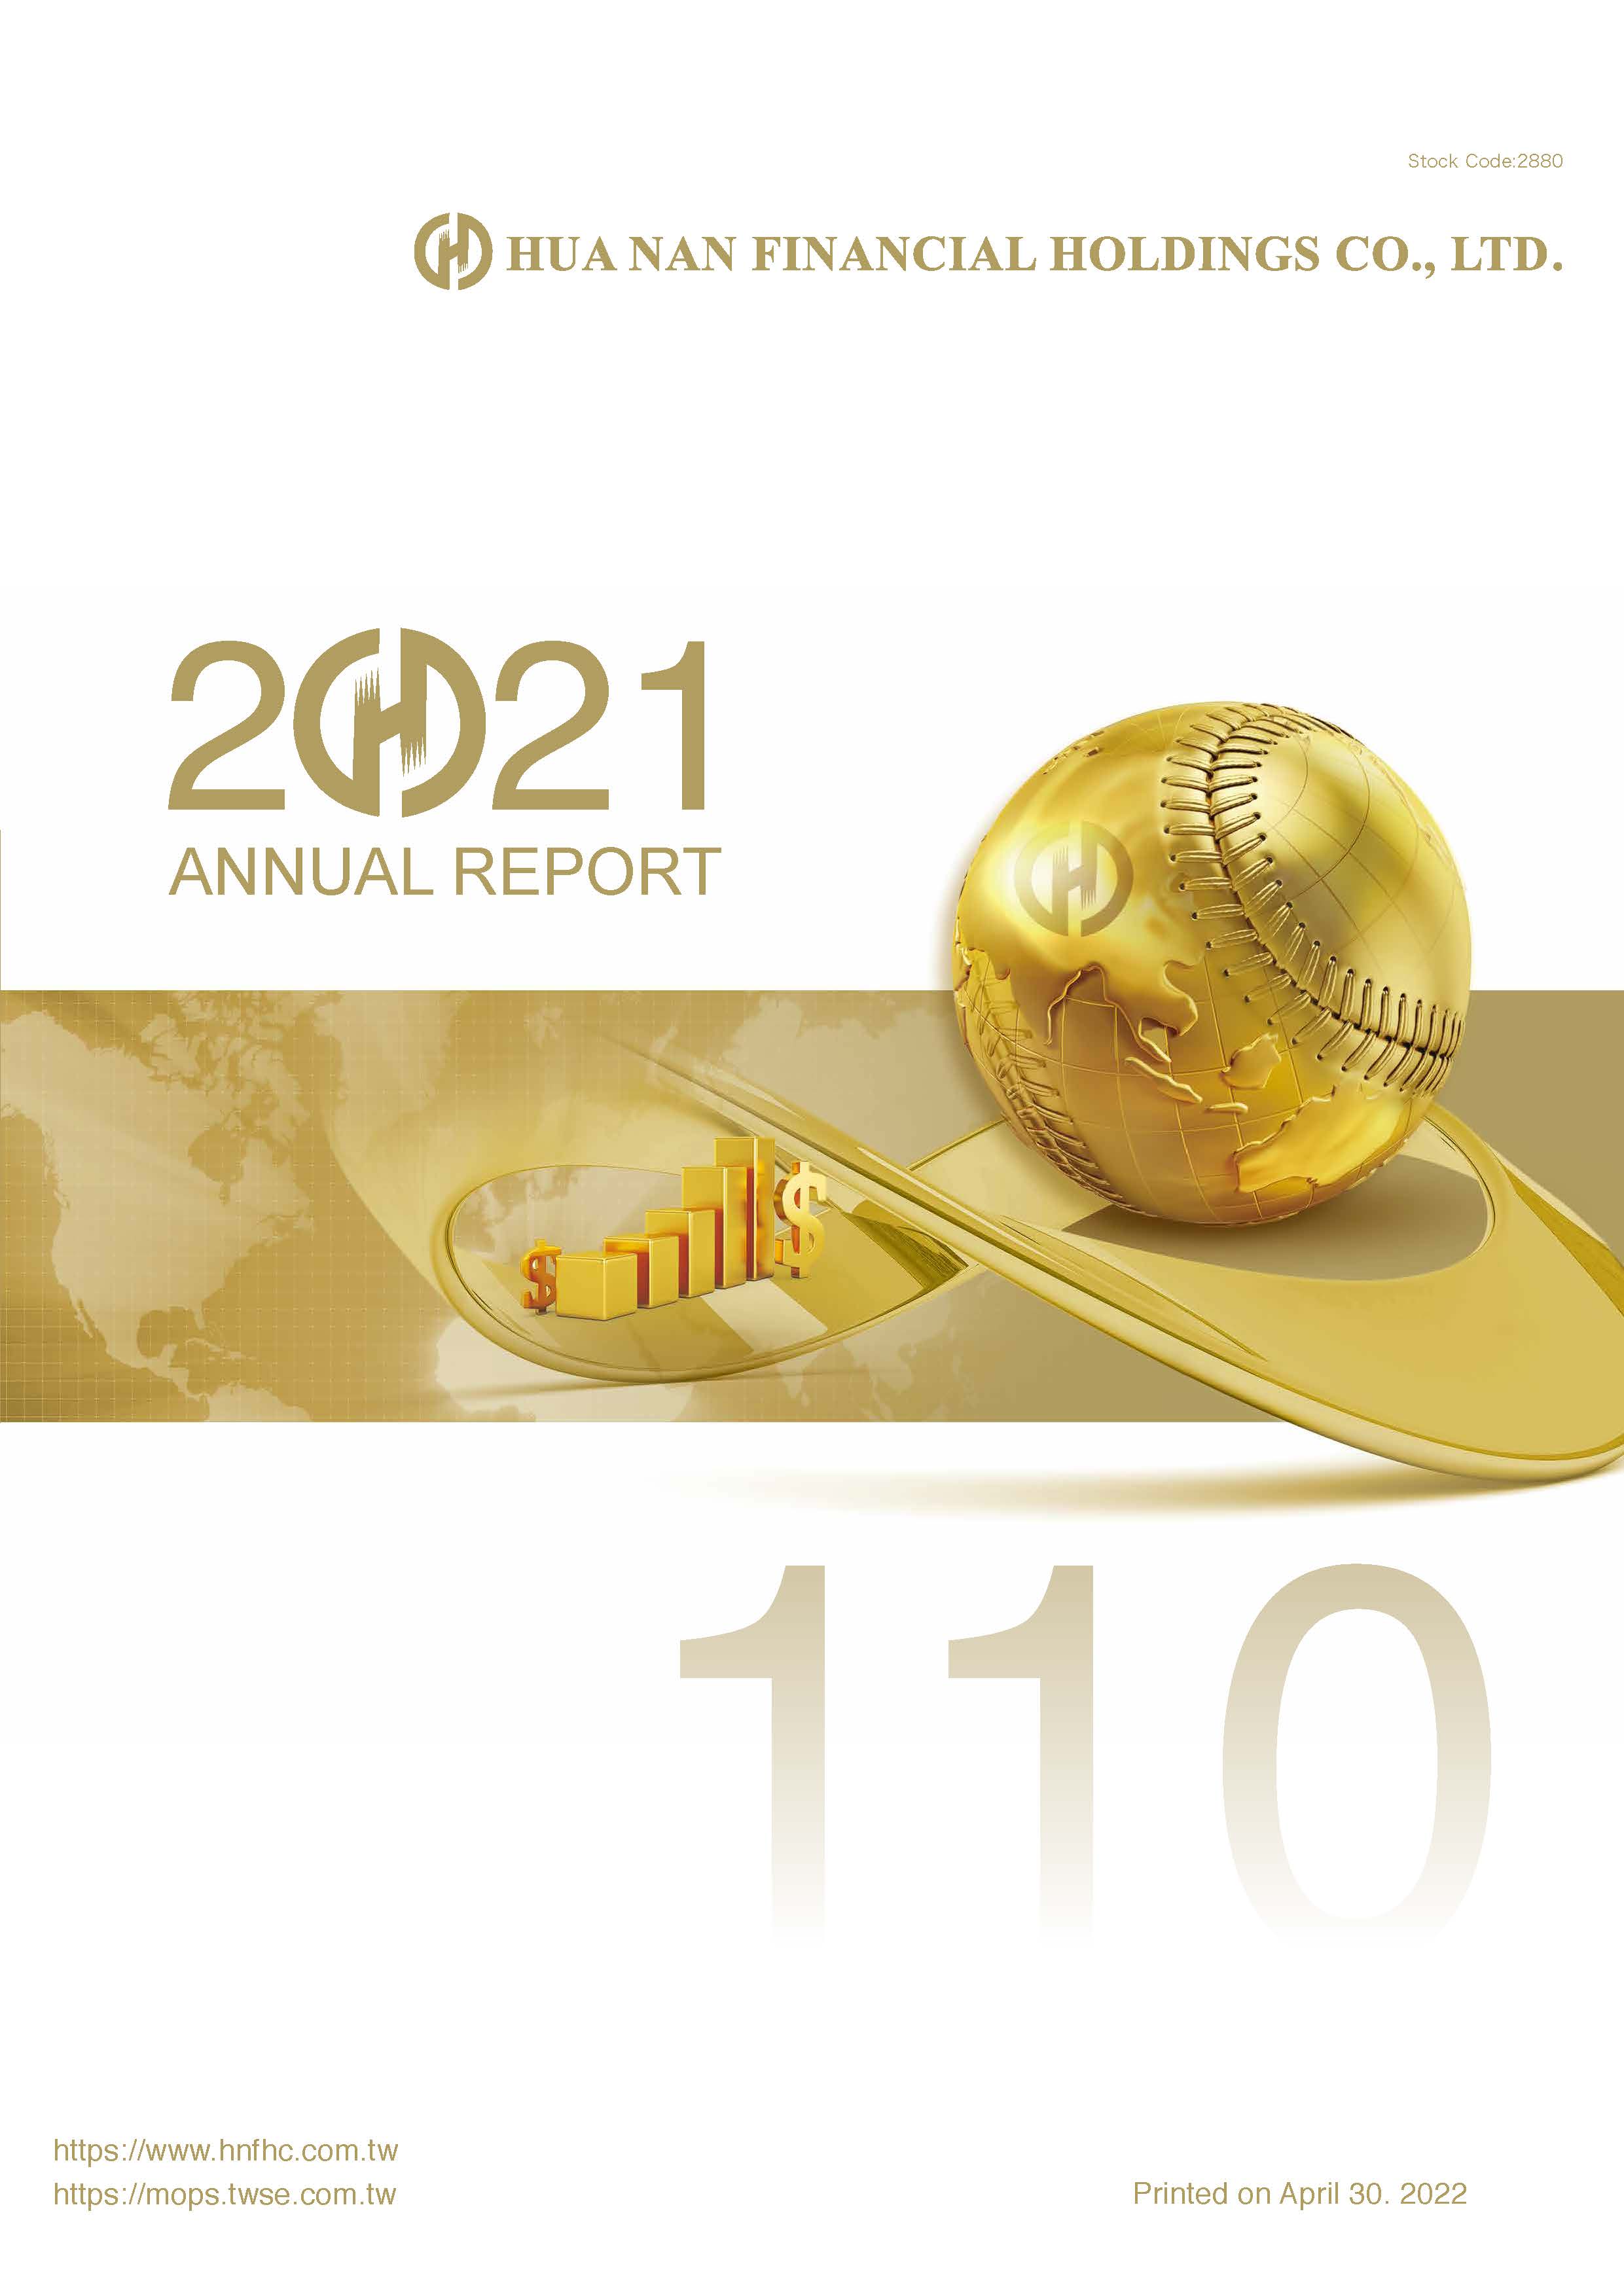 The cover of 2021 Annual Reprots